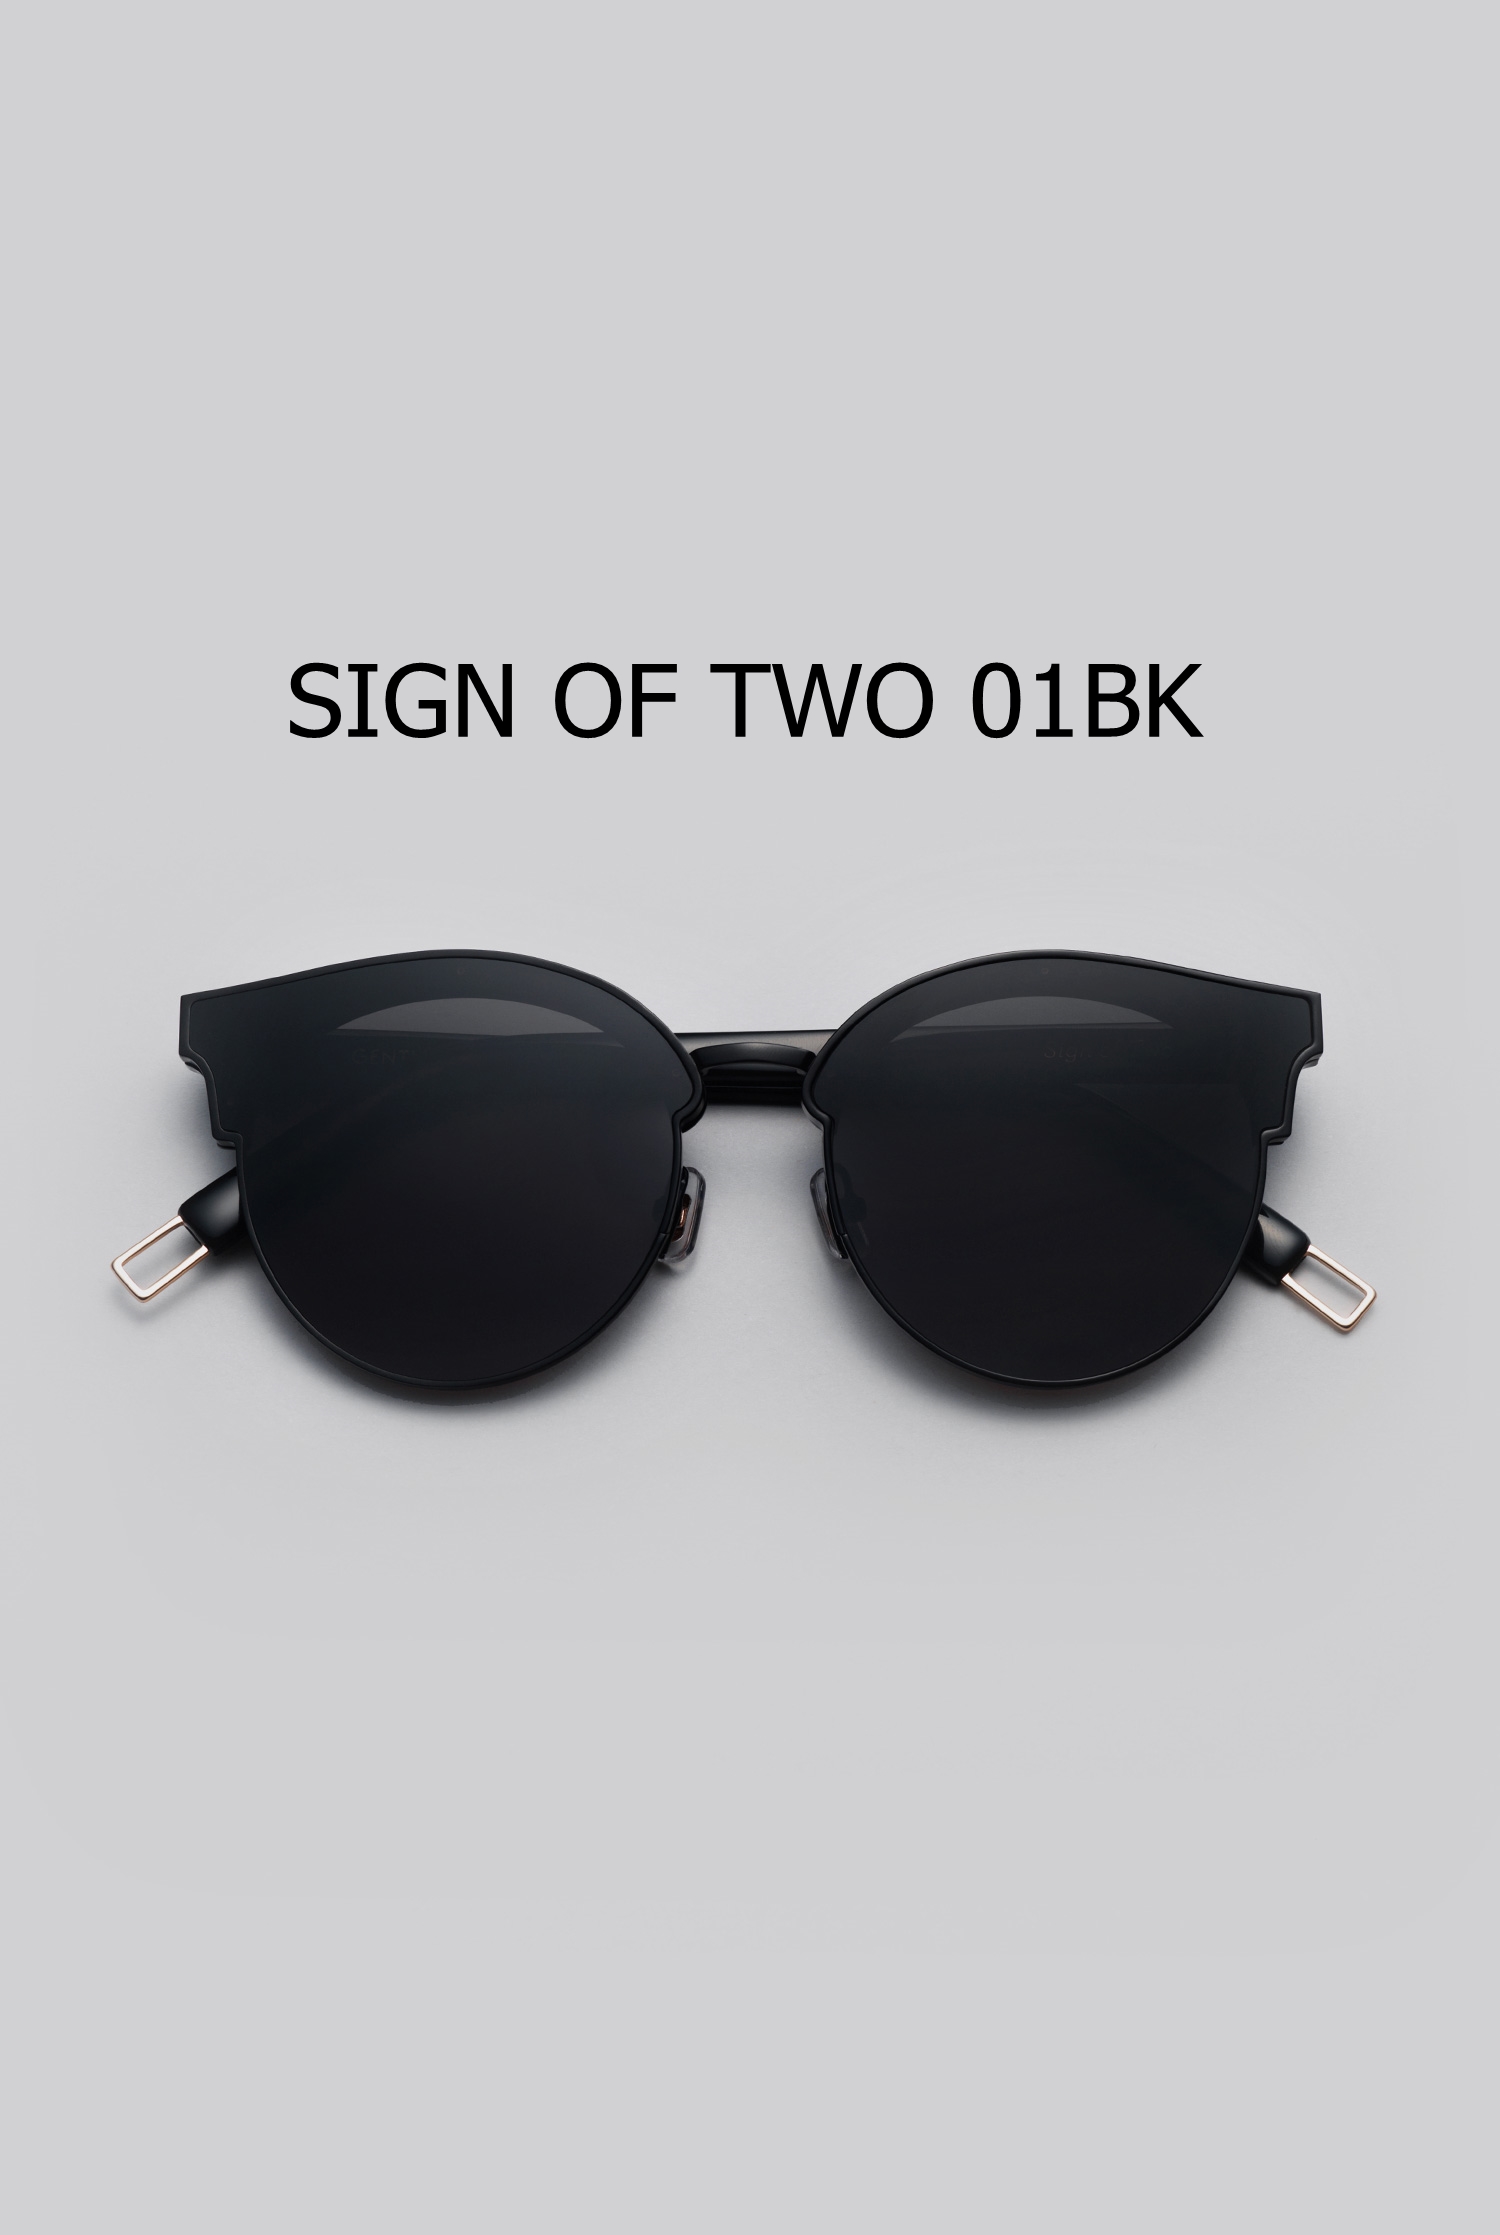 SIGN OF TWO 01BK 